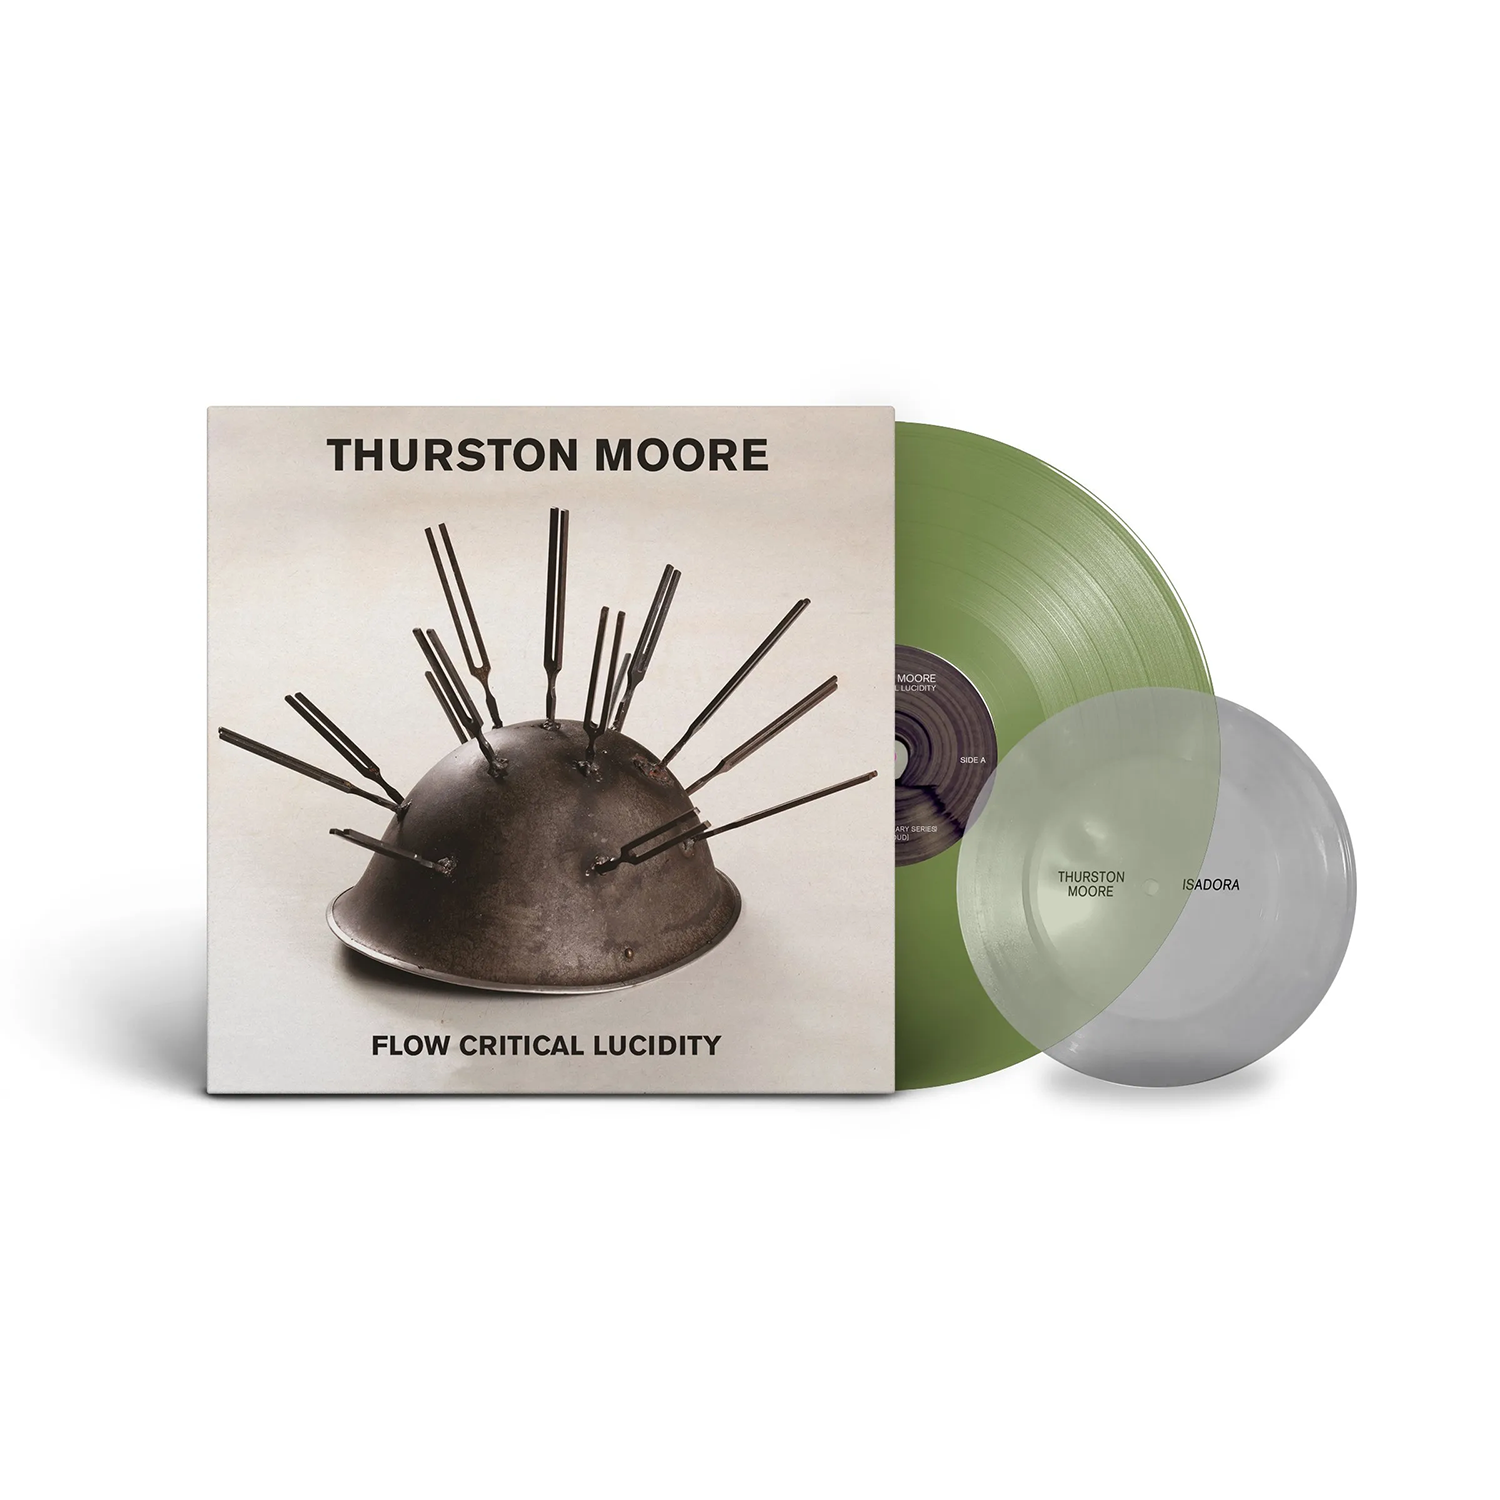 Thurston Moore - Flow Critical Lucidity: Limited Green Vinyl LP & Clear Flexi 7"